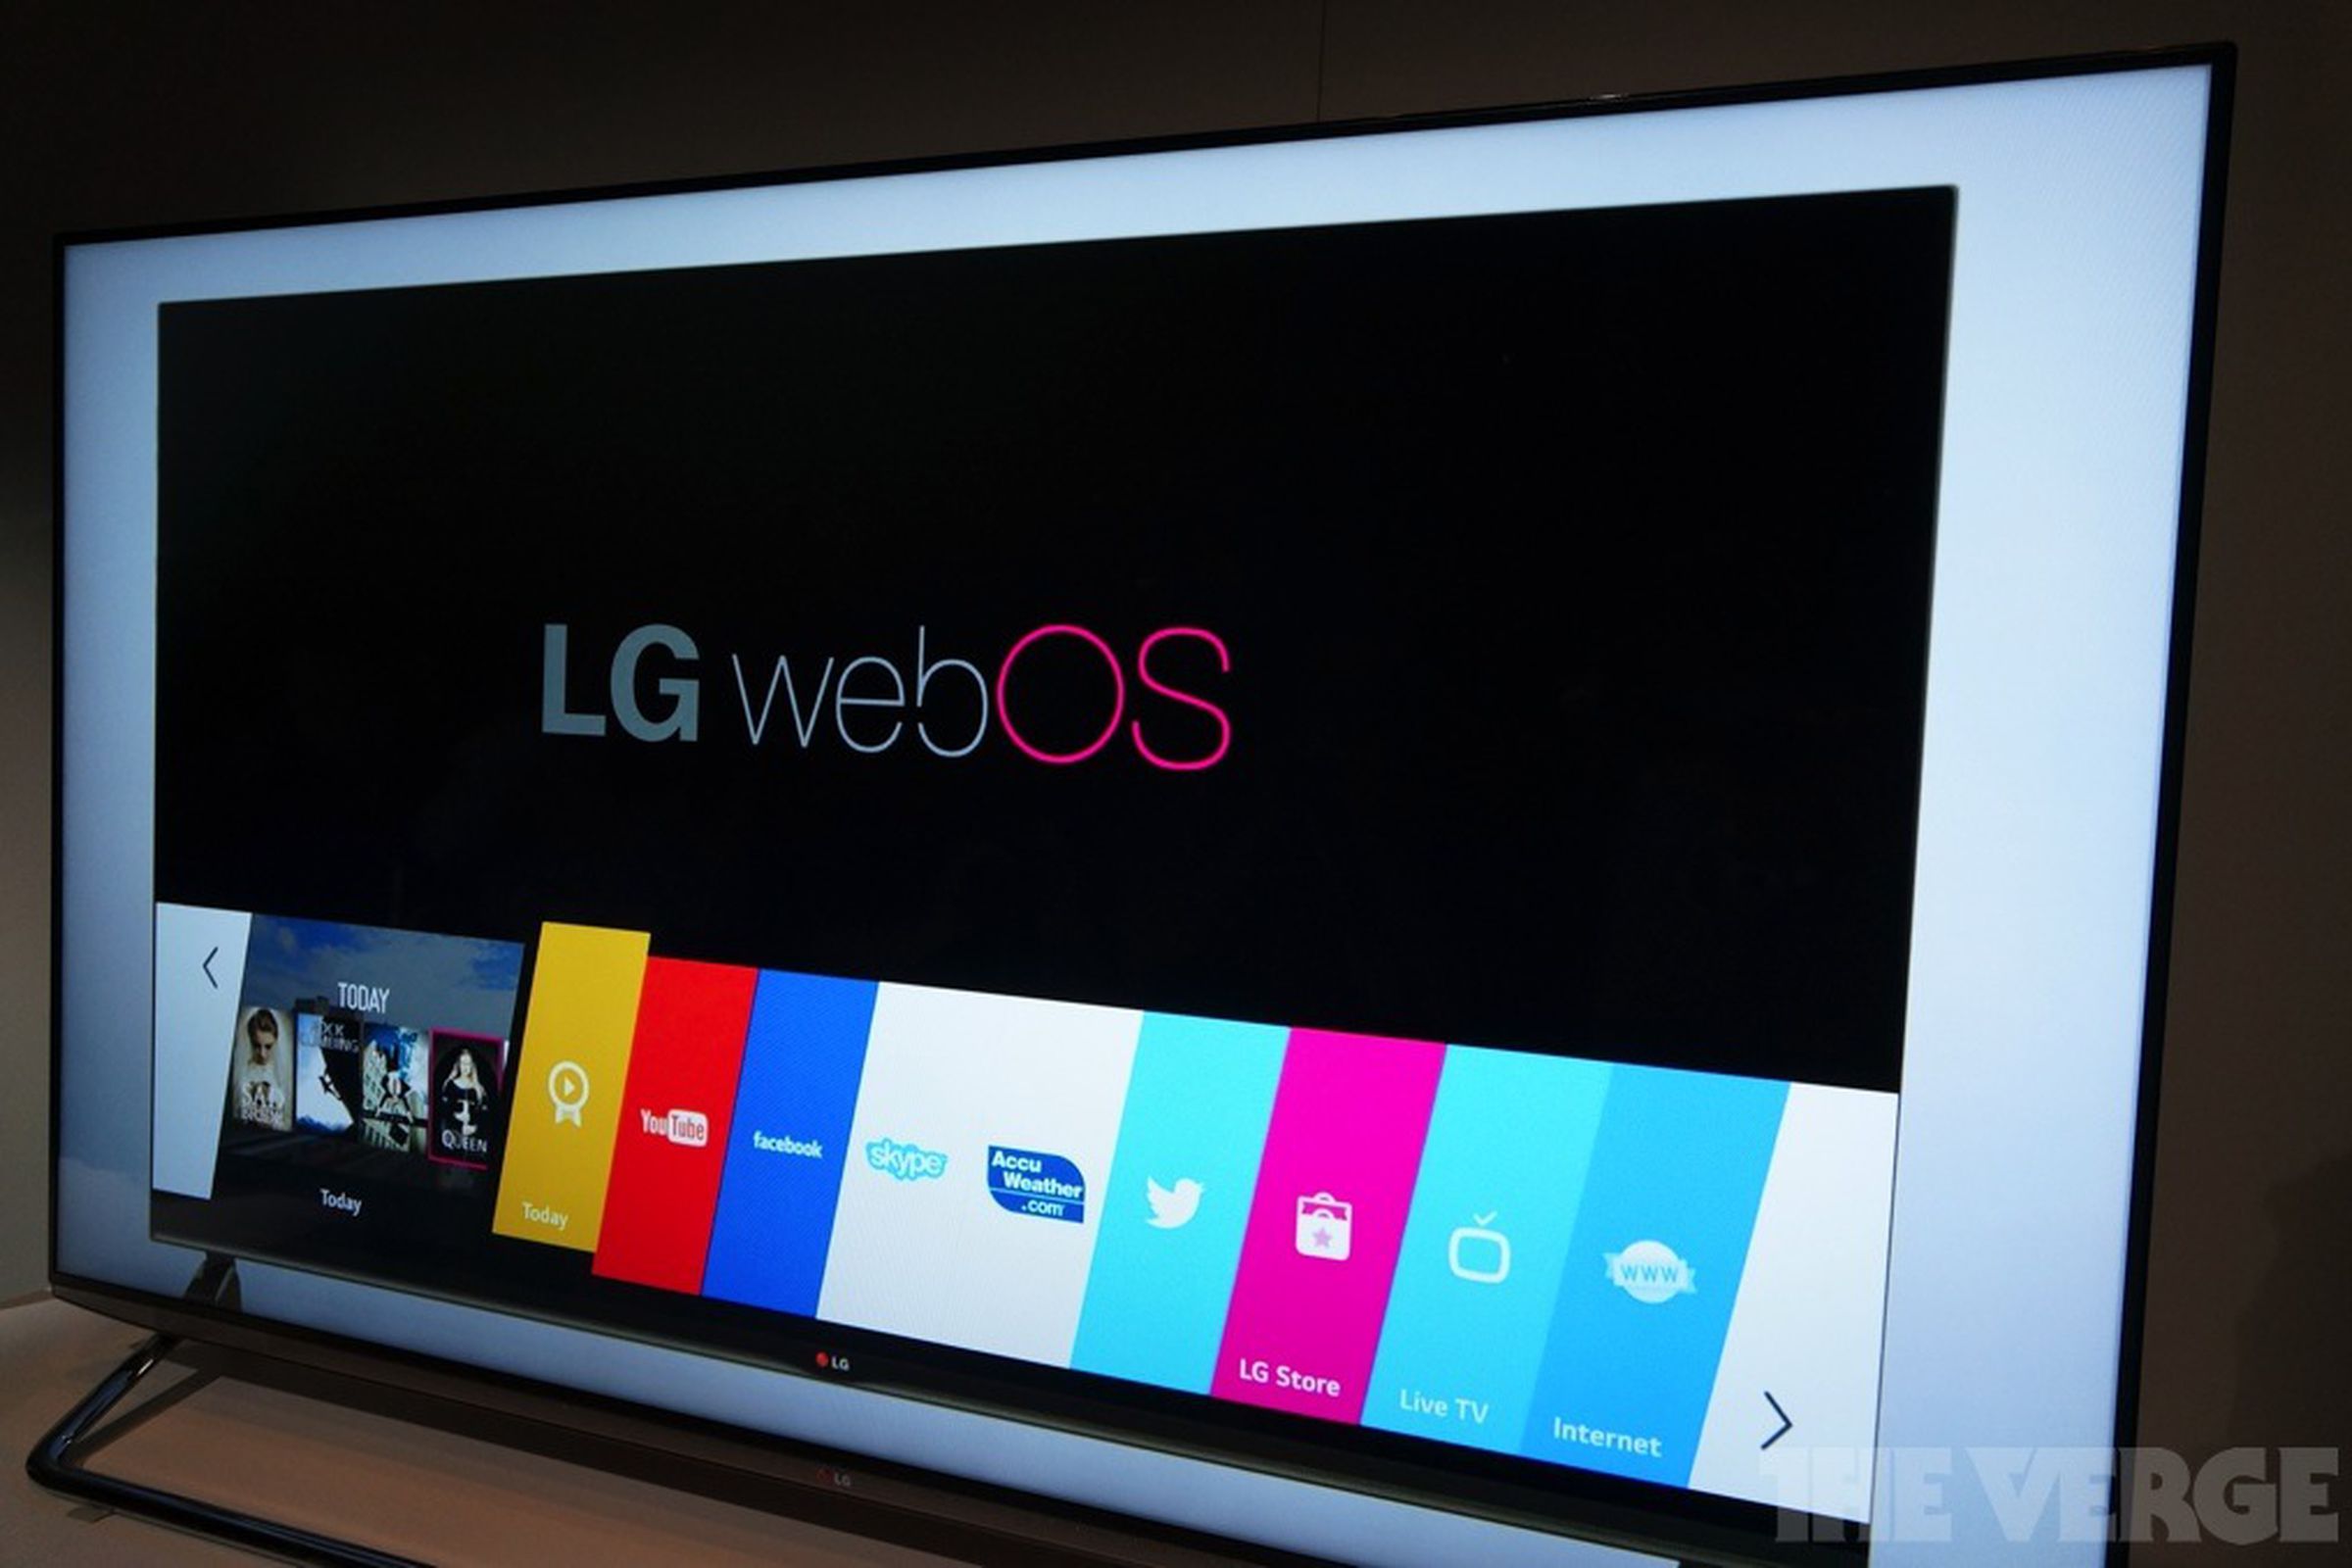 LG primarily uses webOS in its smart TVs.